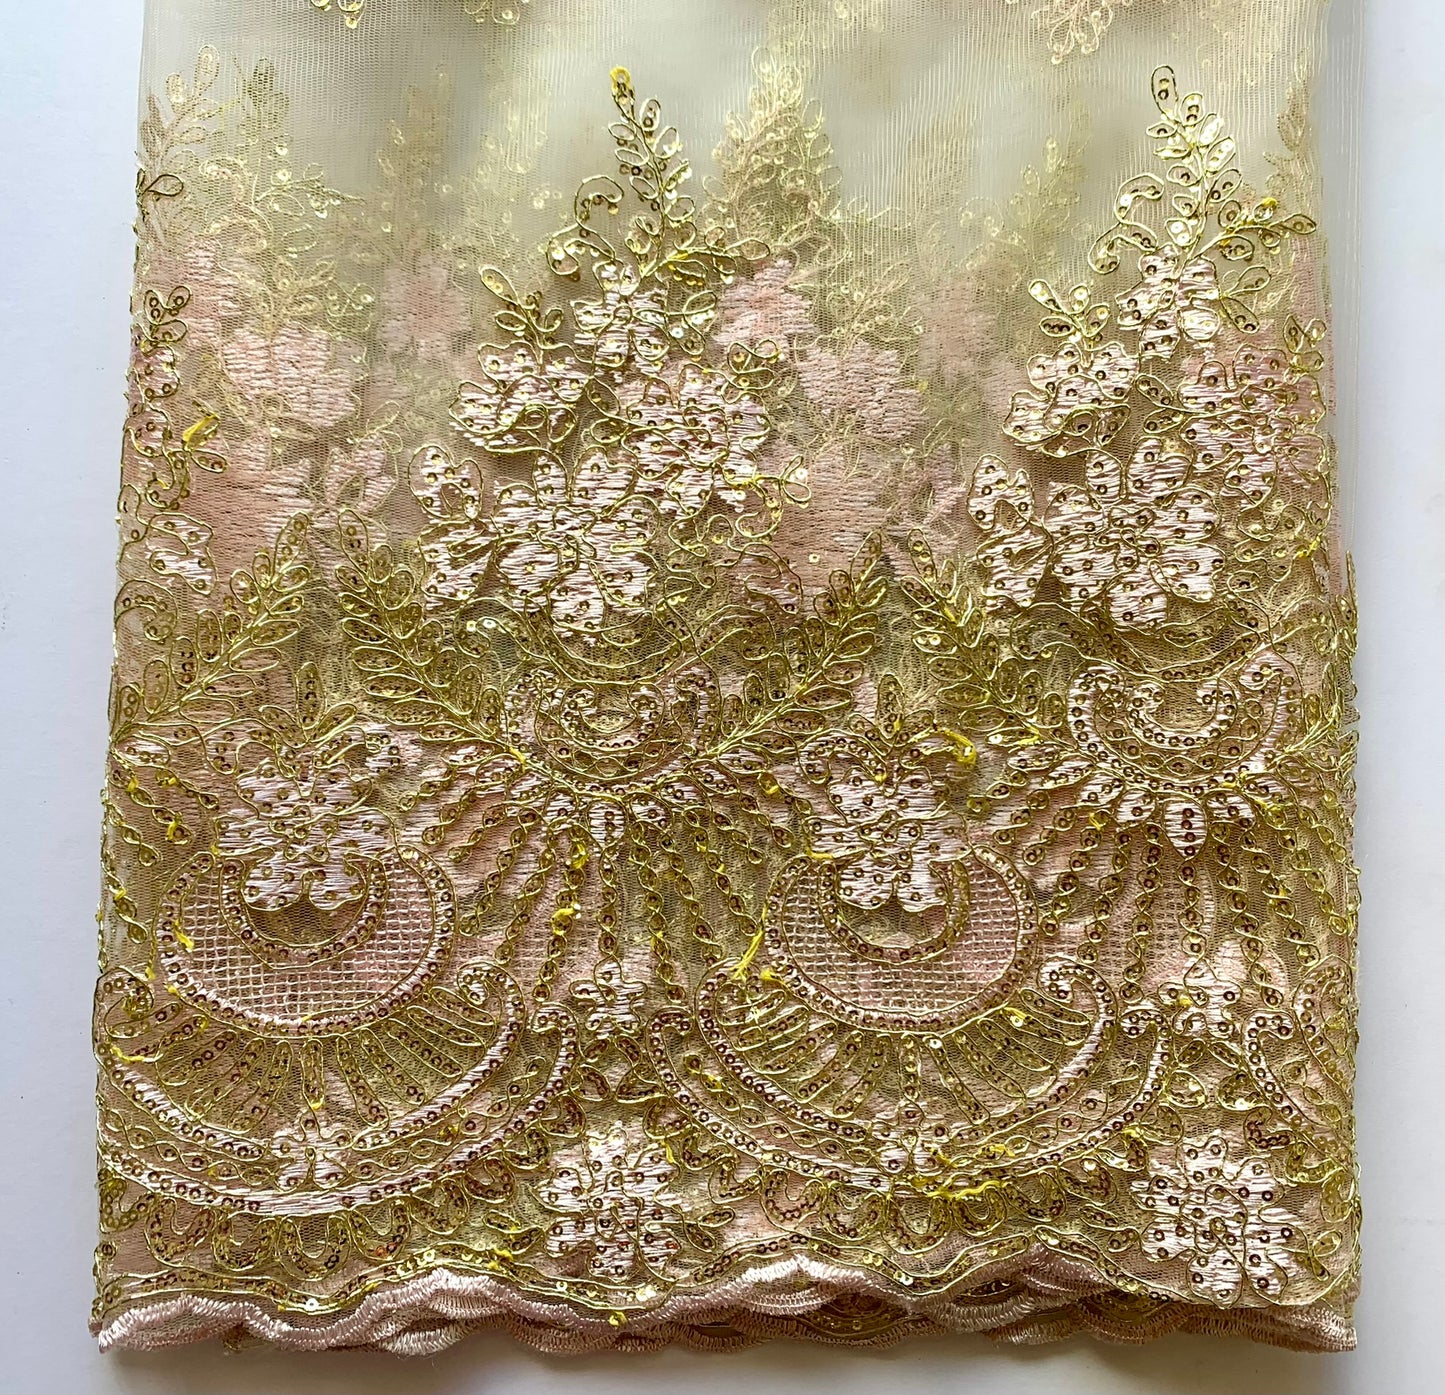 Jasmine Lace - Pink and Gold